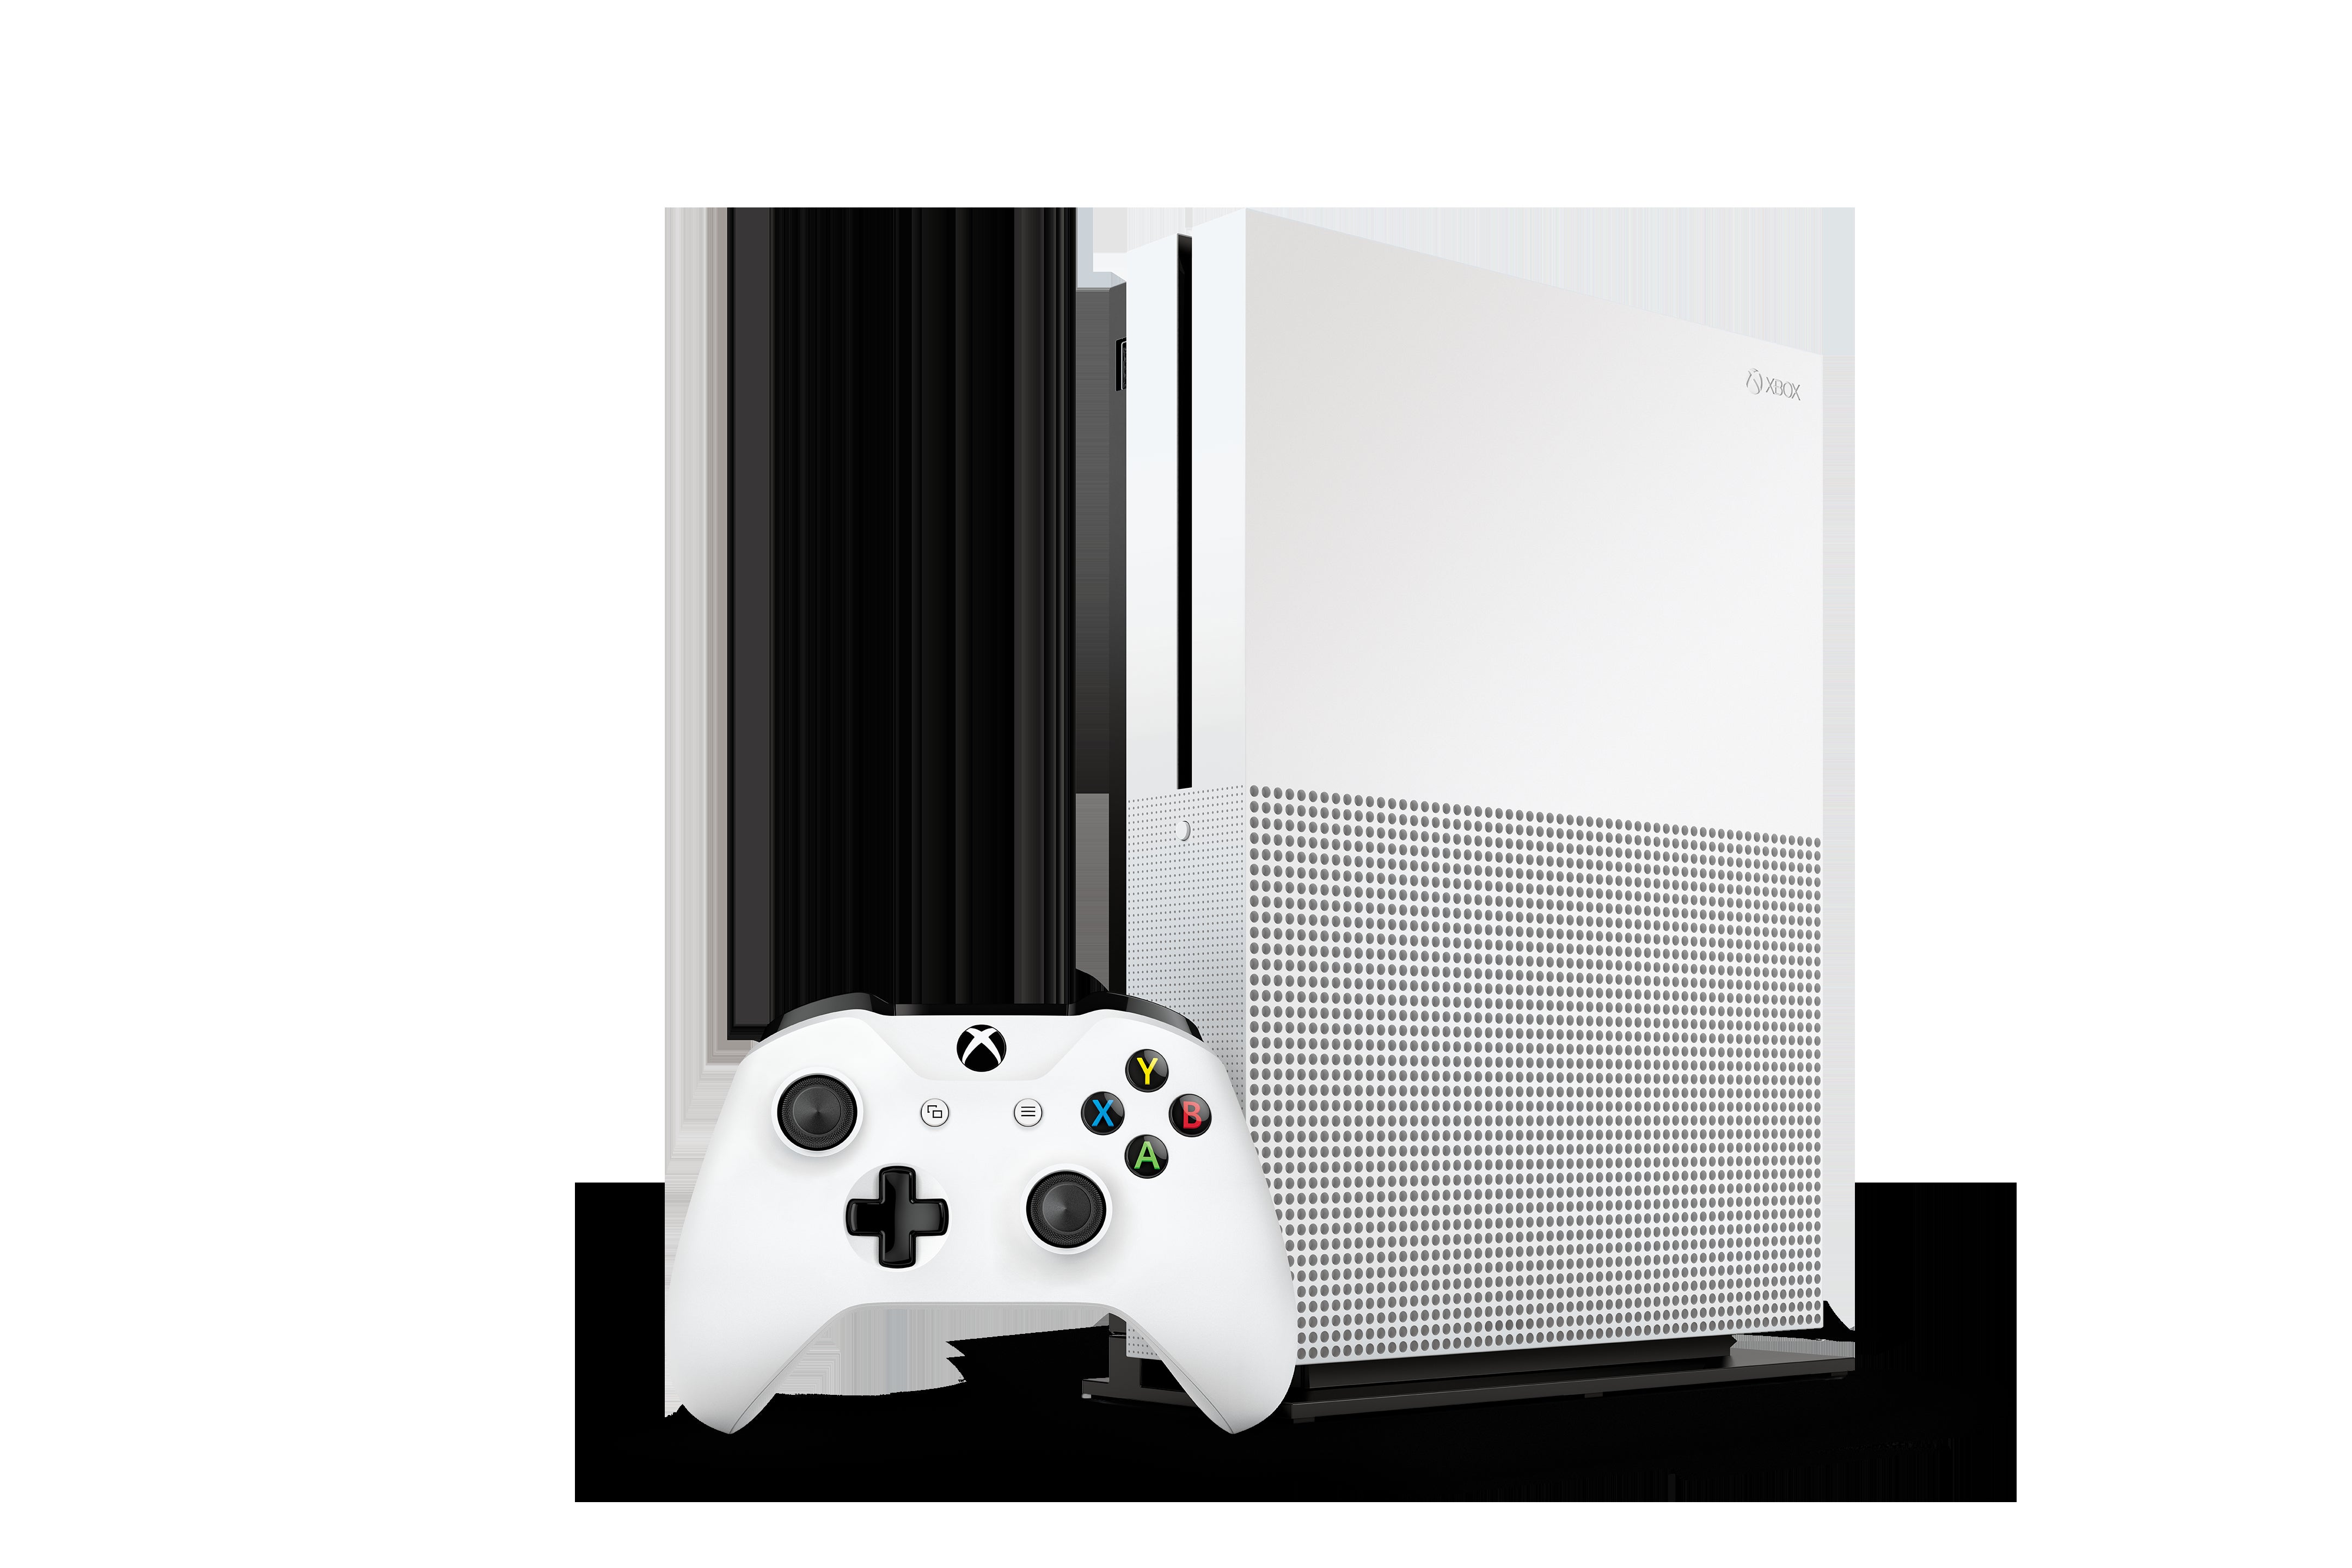 Xbox One S review: A great Ultra HD Blu-ray player for gamers